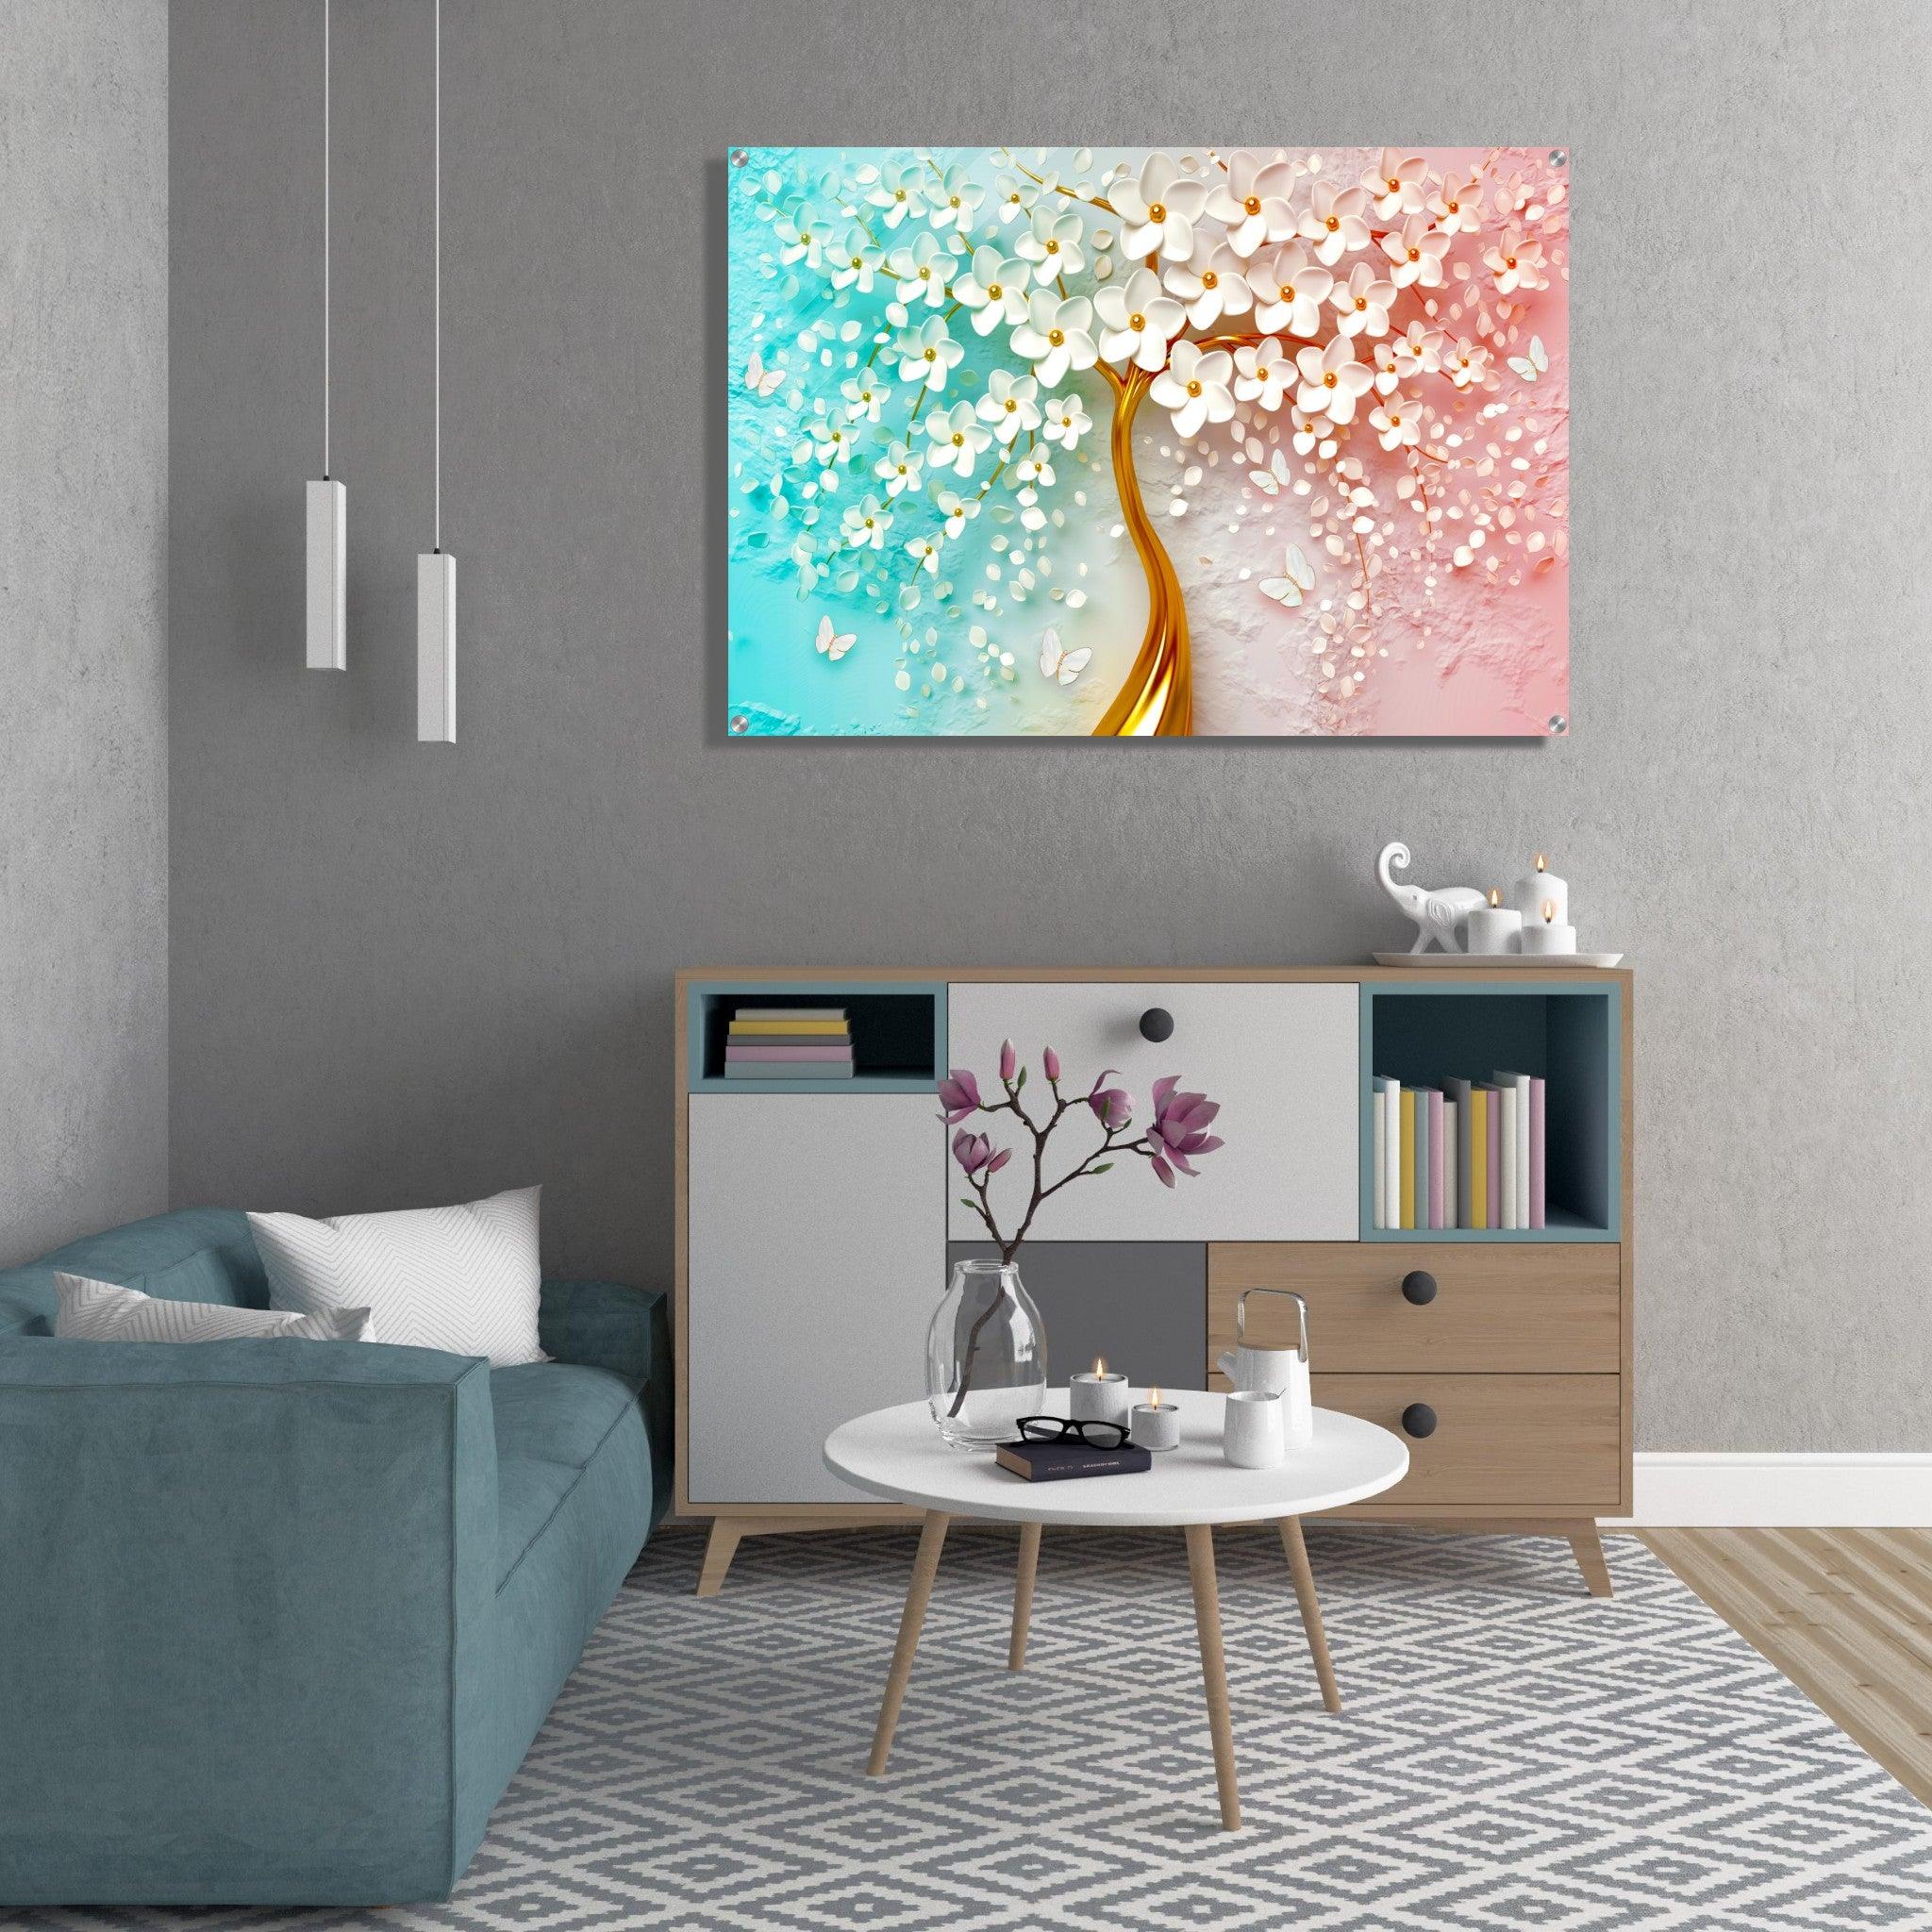 Surreal Serenity: White Blossoms and Gold Accents Acrylic Glass Wall Art - Wallfix